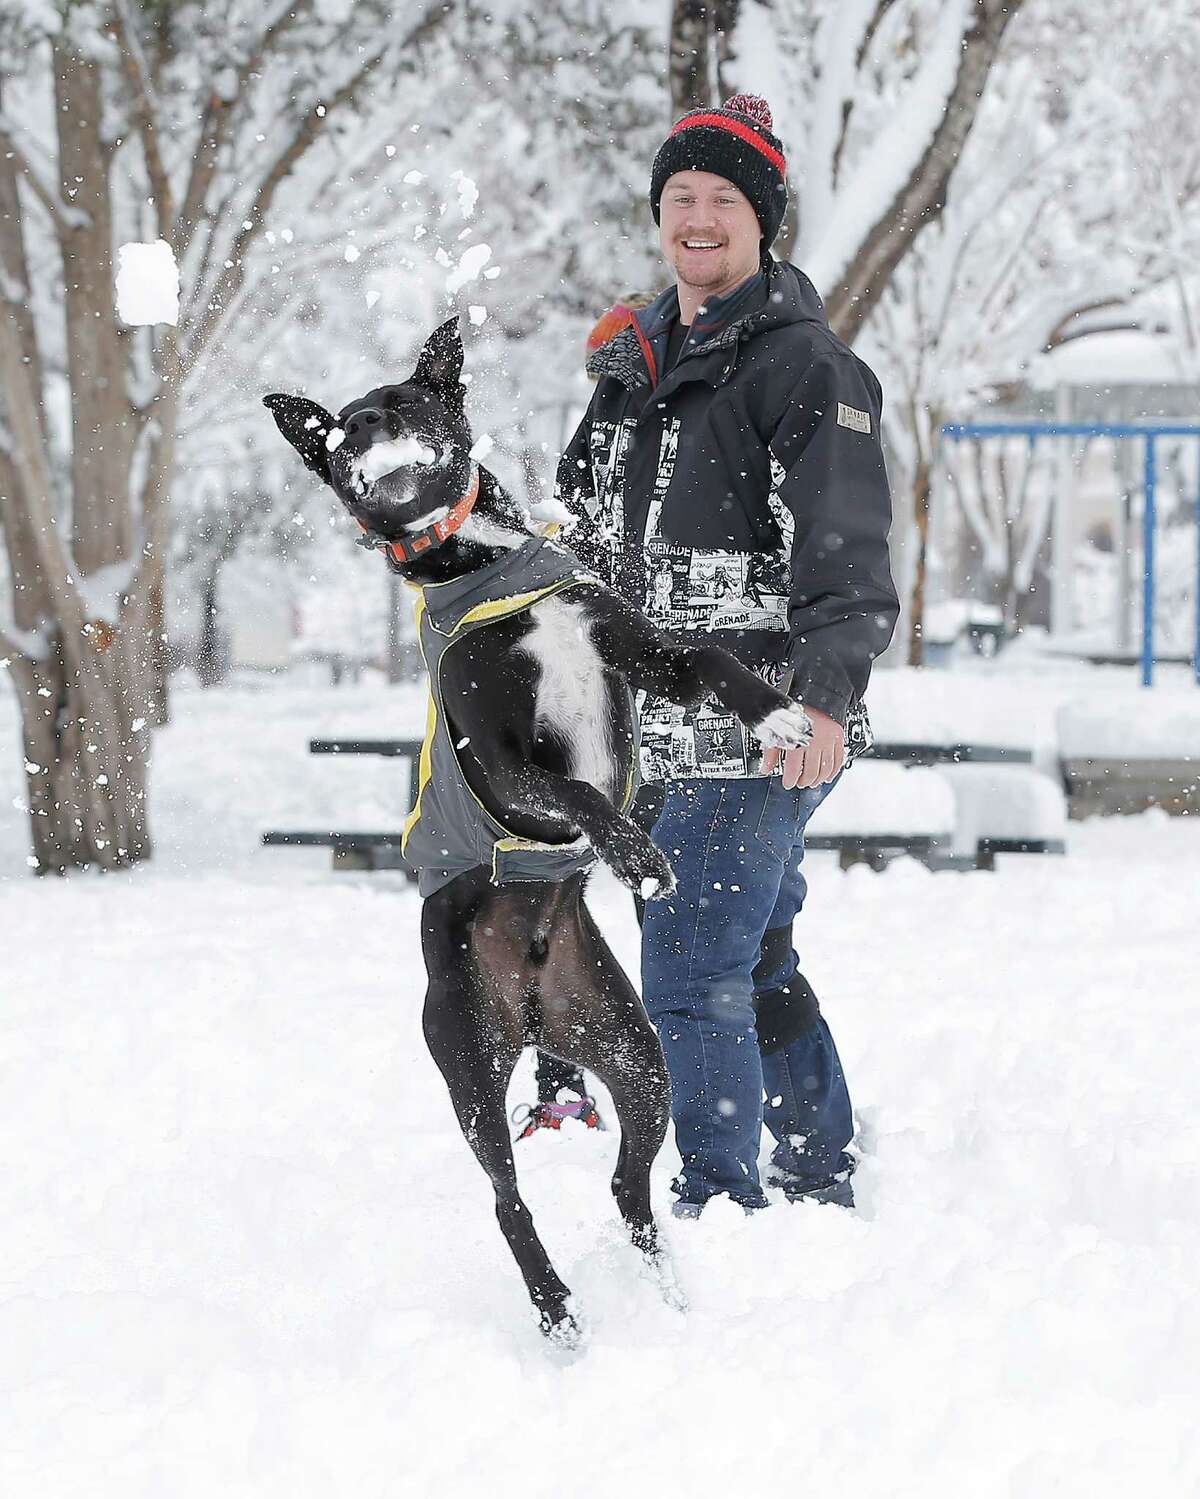 Miles Overstreet throws snowballs to his dog Ferris as they play at Madeline Park in the Kern Place neighborhood of El Paso, Texas, Sunday, Dec. 27, 2015. A heavy snowfall created a winter playground for El Pasoans after several inches remained from an overnight storm.